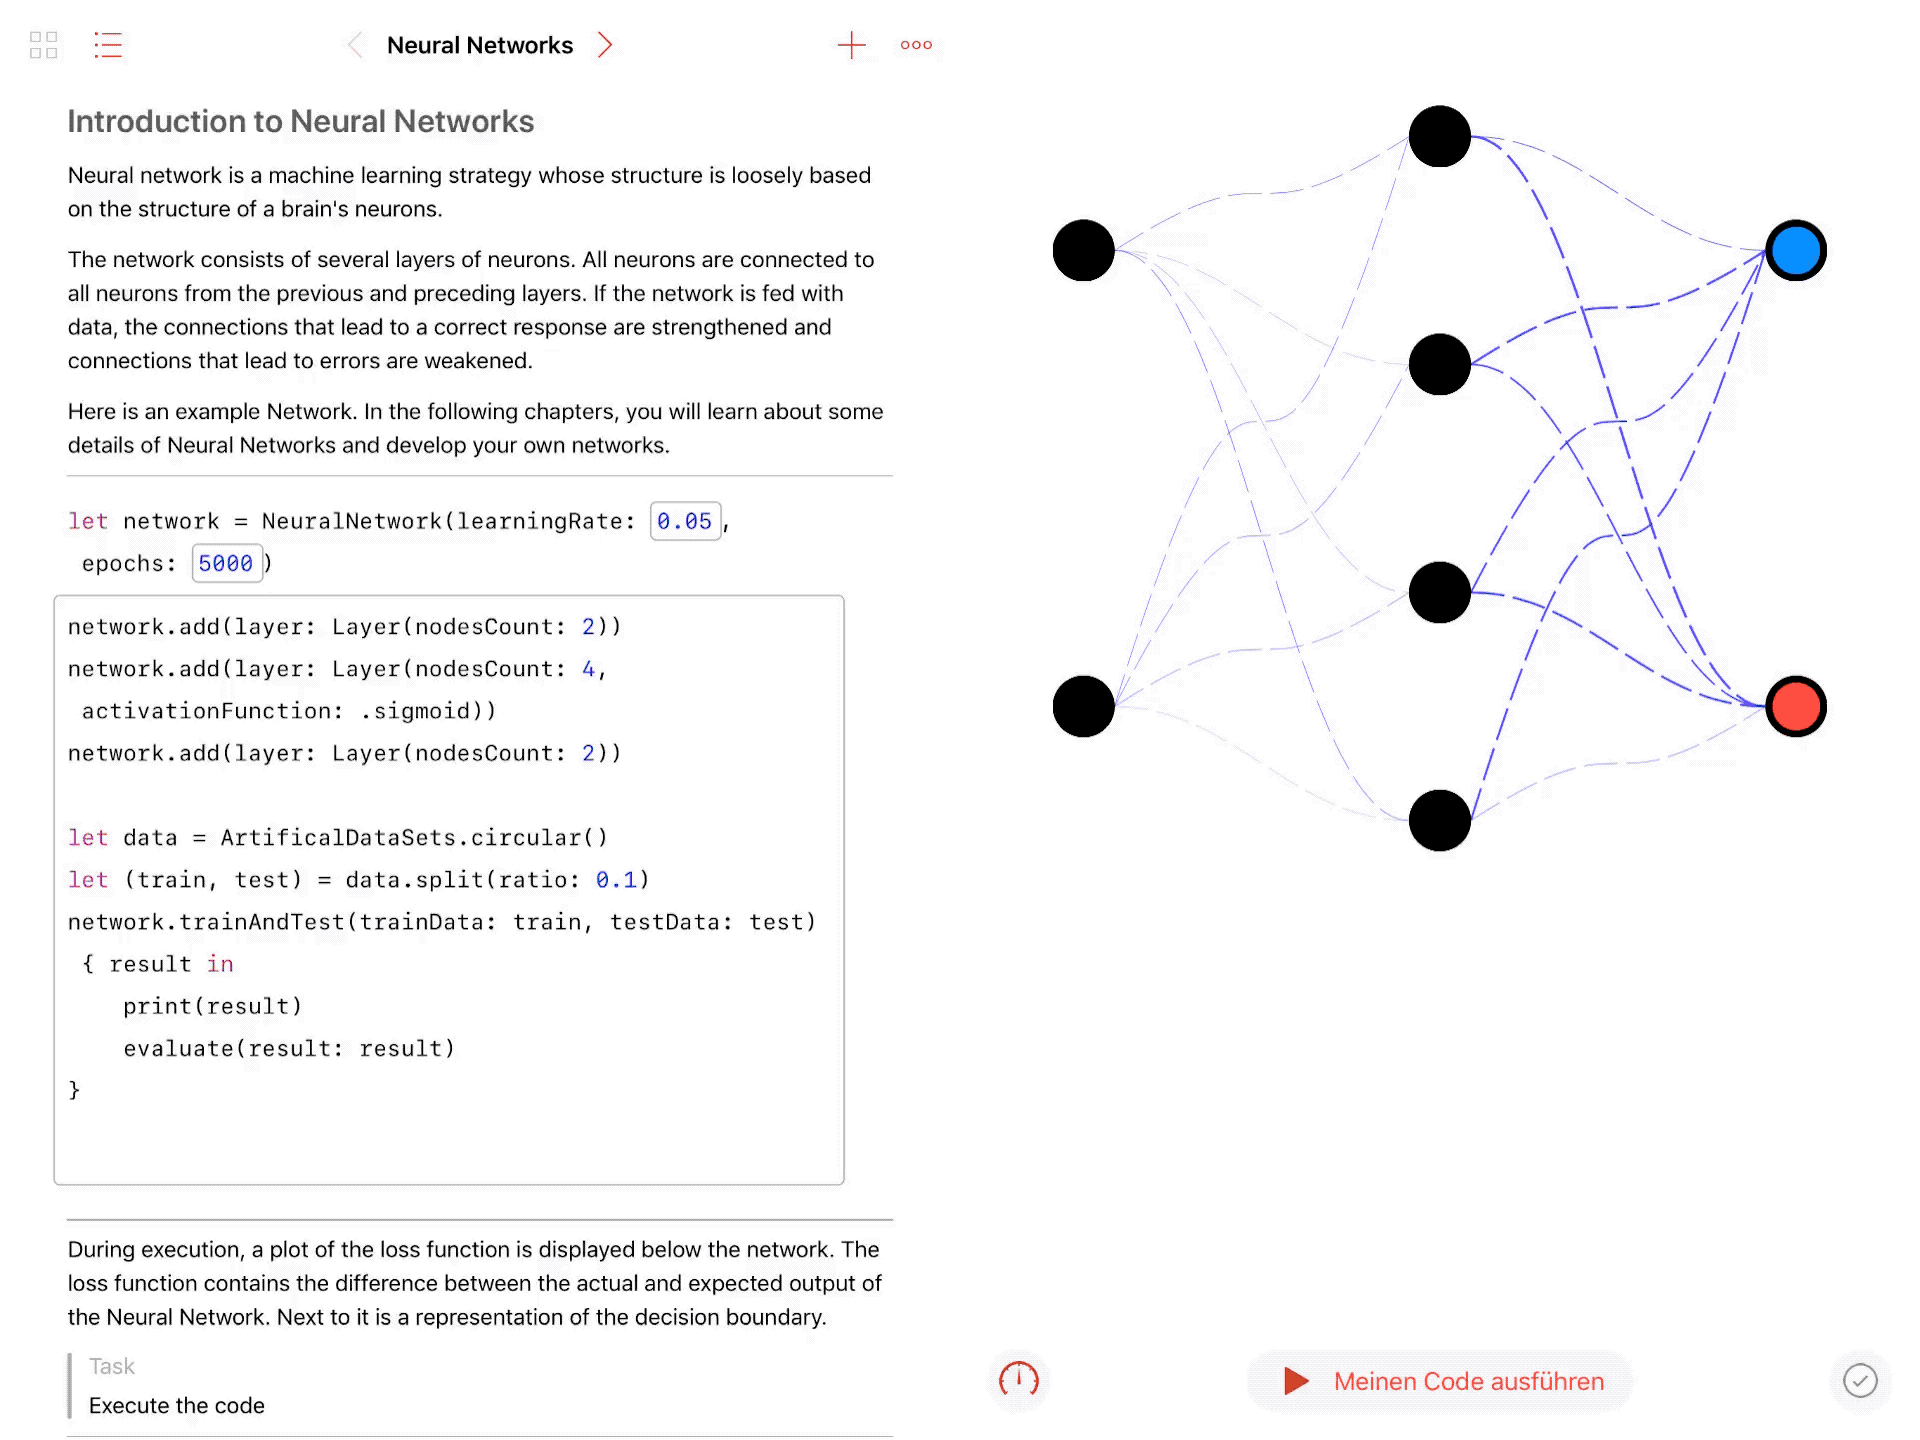 Training of a Neural Network